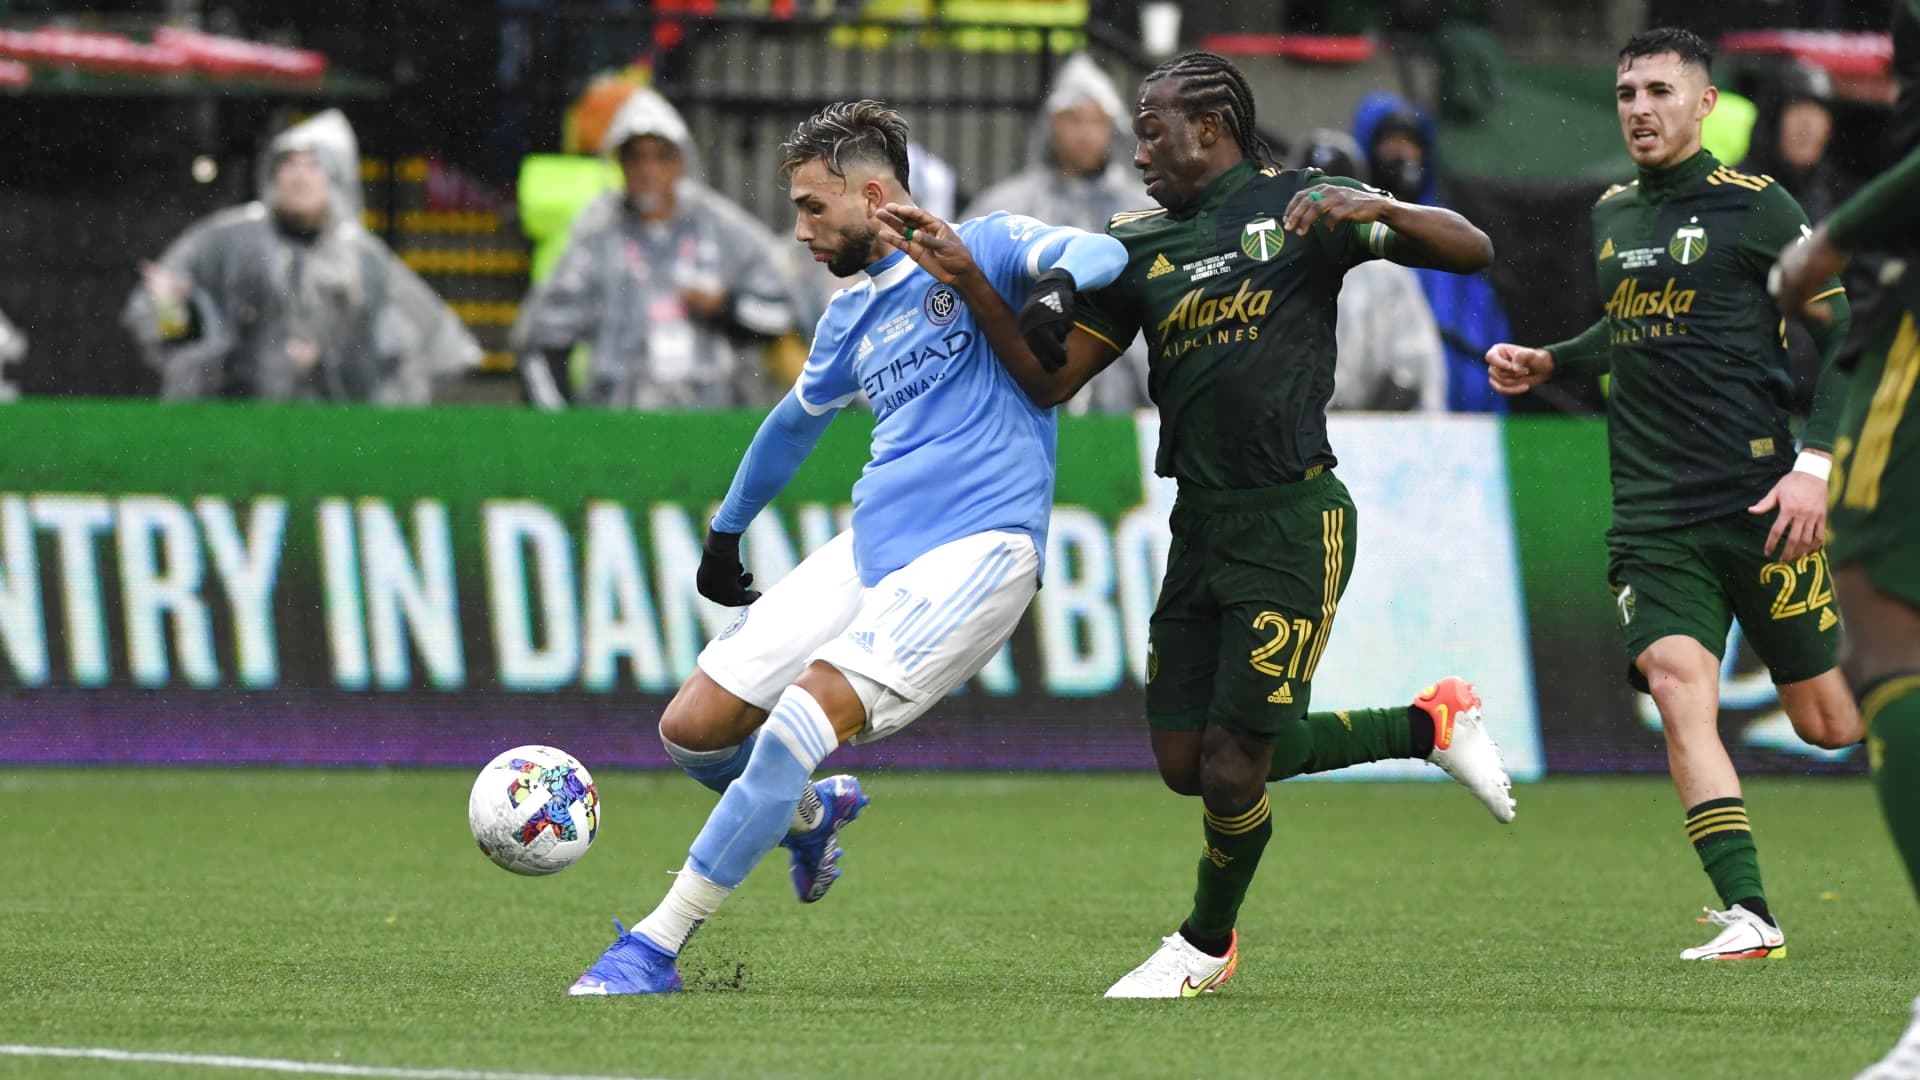 New York City FC forward Valentín Castellanos (11) passes the ball forward against Portland Timbers midfielder Diego Chara (21) during the MLS Cup Final between the Portland Timbers and New York City FC on December 11, 2021 at Providence Park in Portland, Oregon.